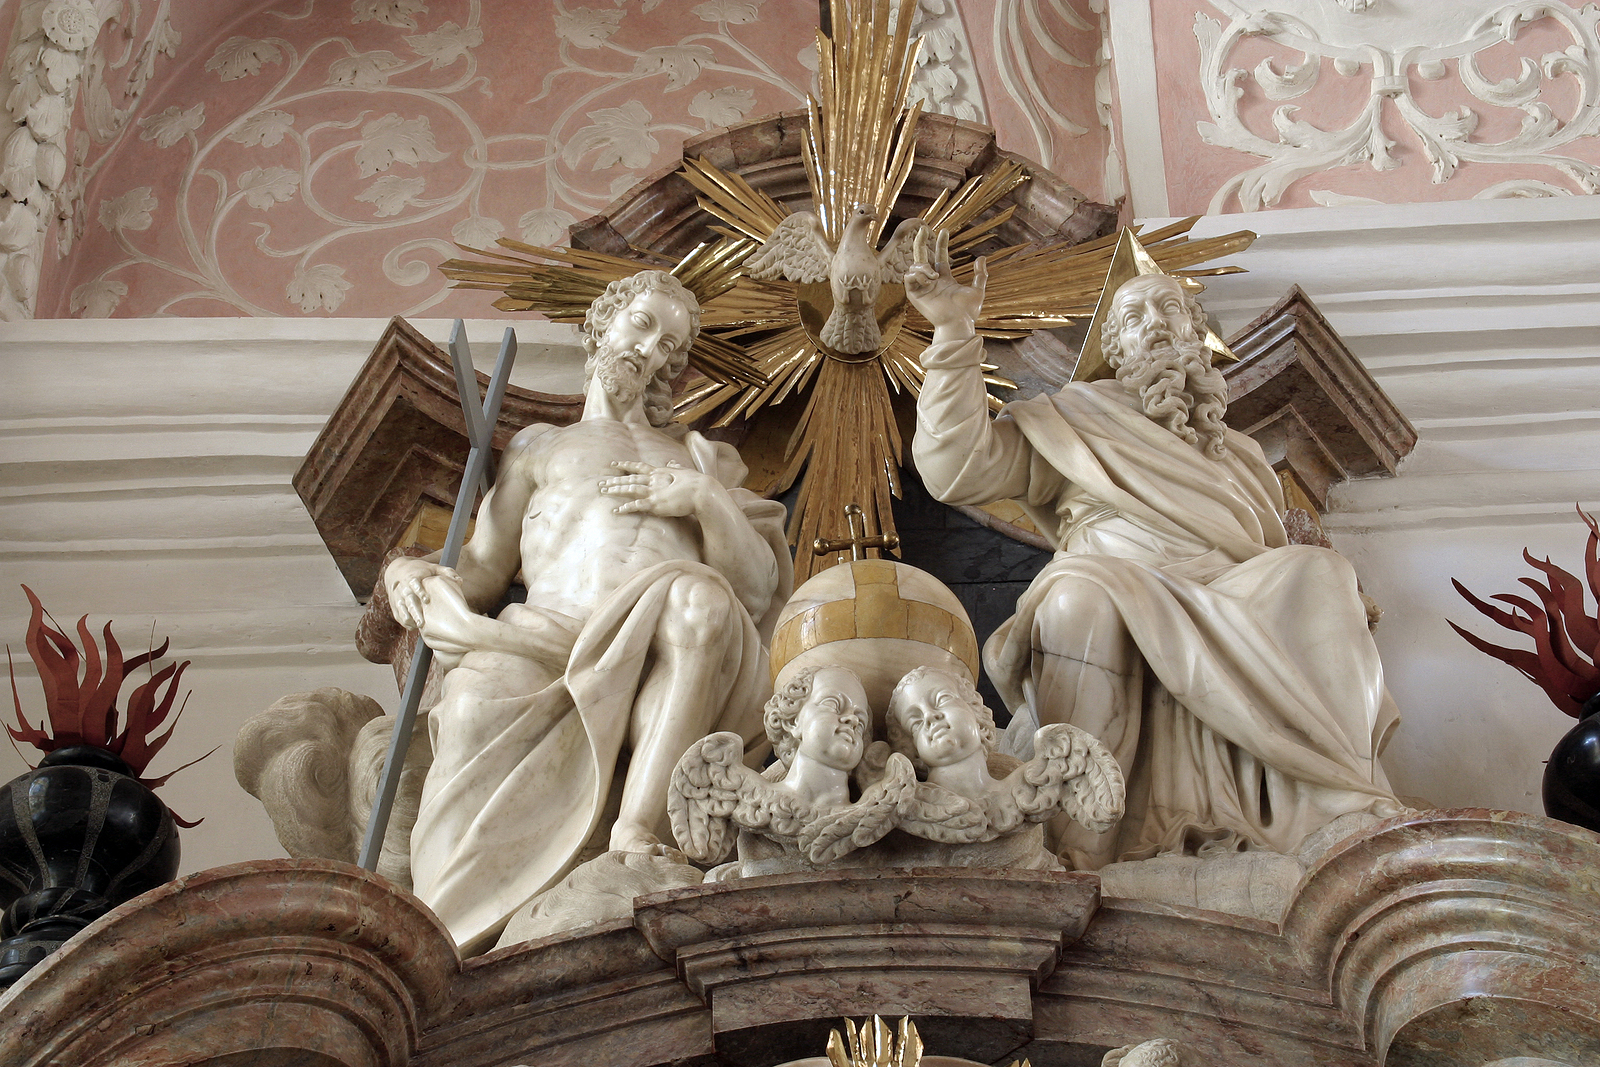 Church statues depicting the holy trinity